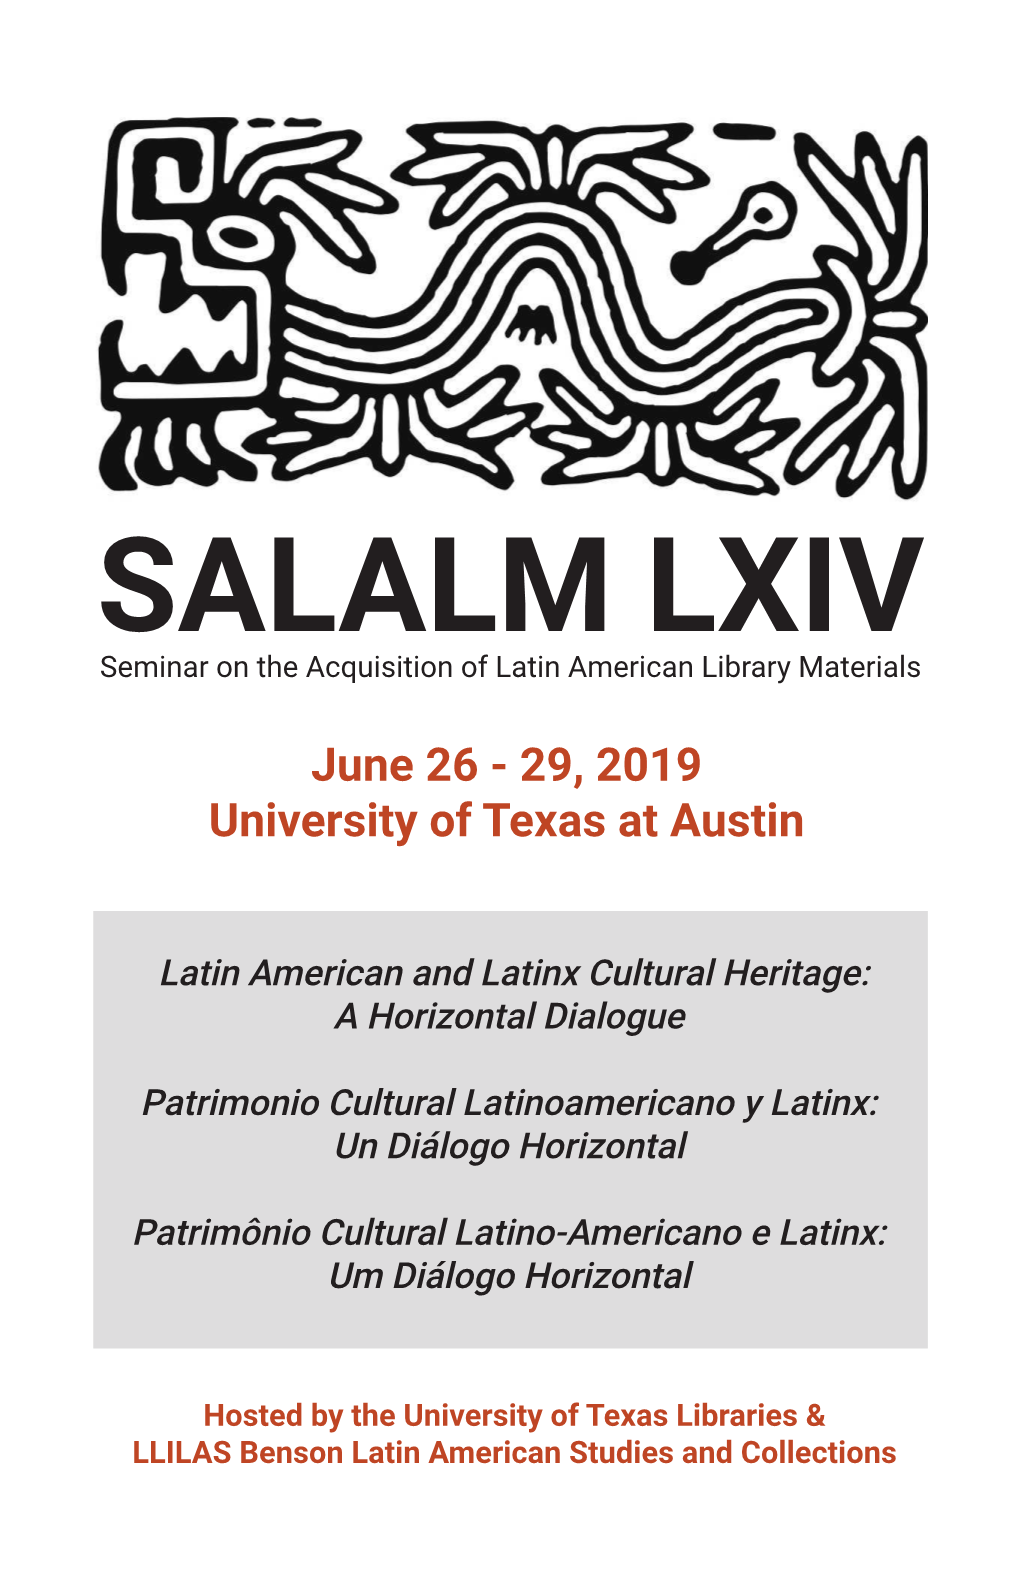 SALALM LXIV Seminar on the Acquisition of Latin American Library Materials